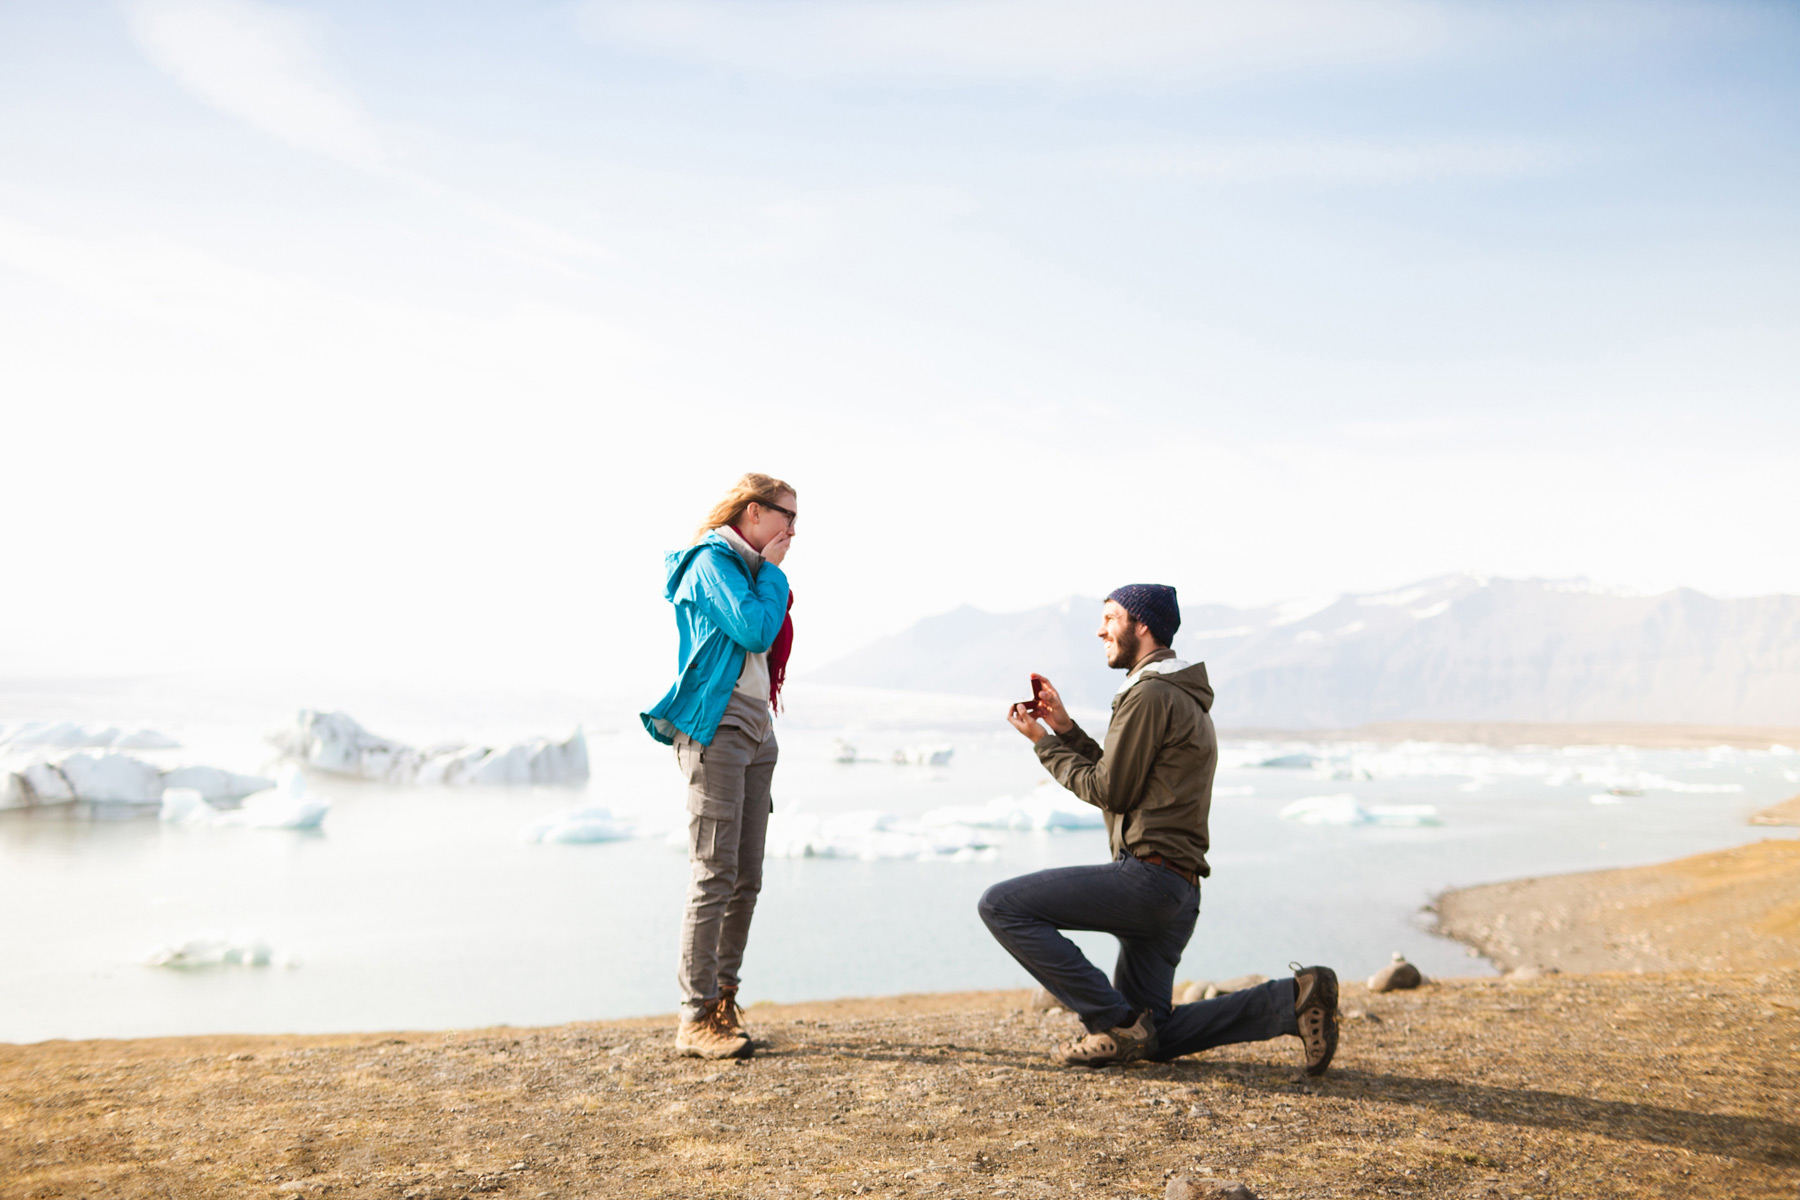 Proposes offers. To propose. The proposal. Propose pose. Make a proposal.